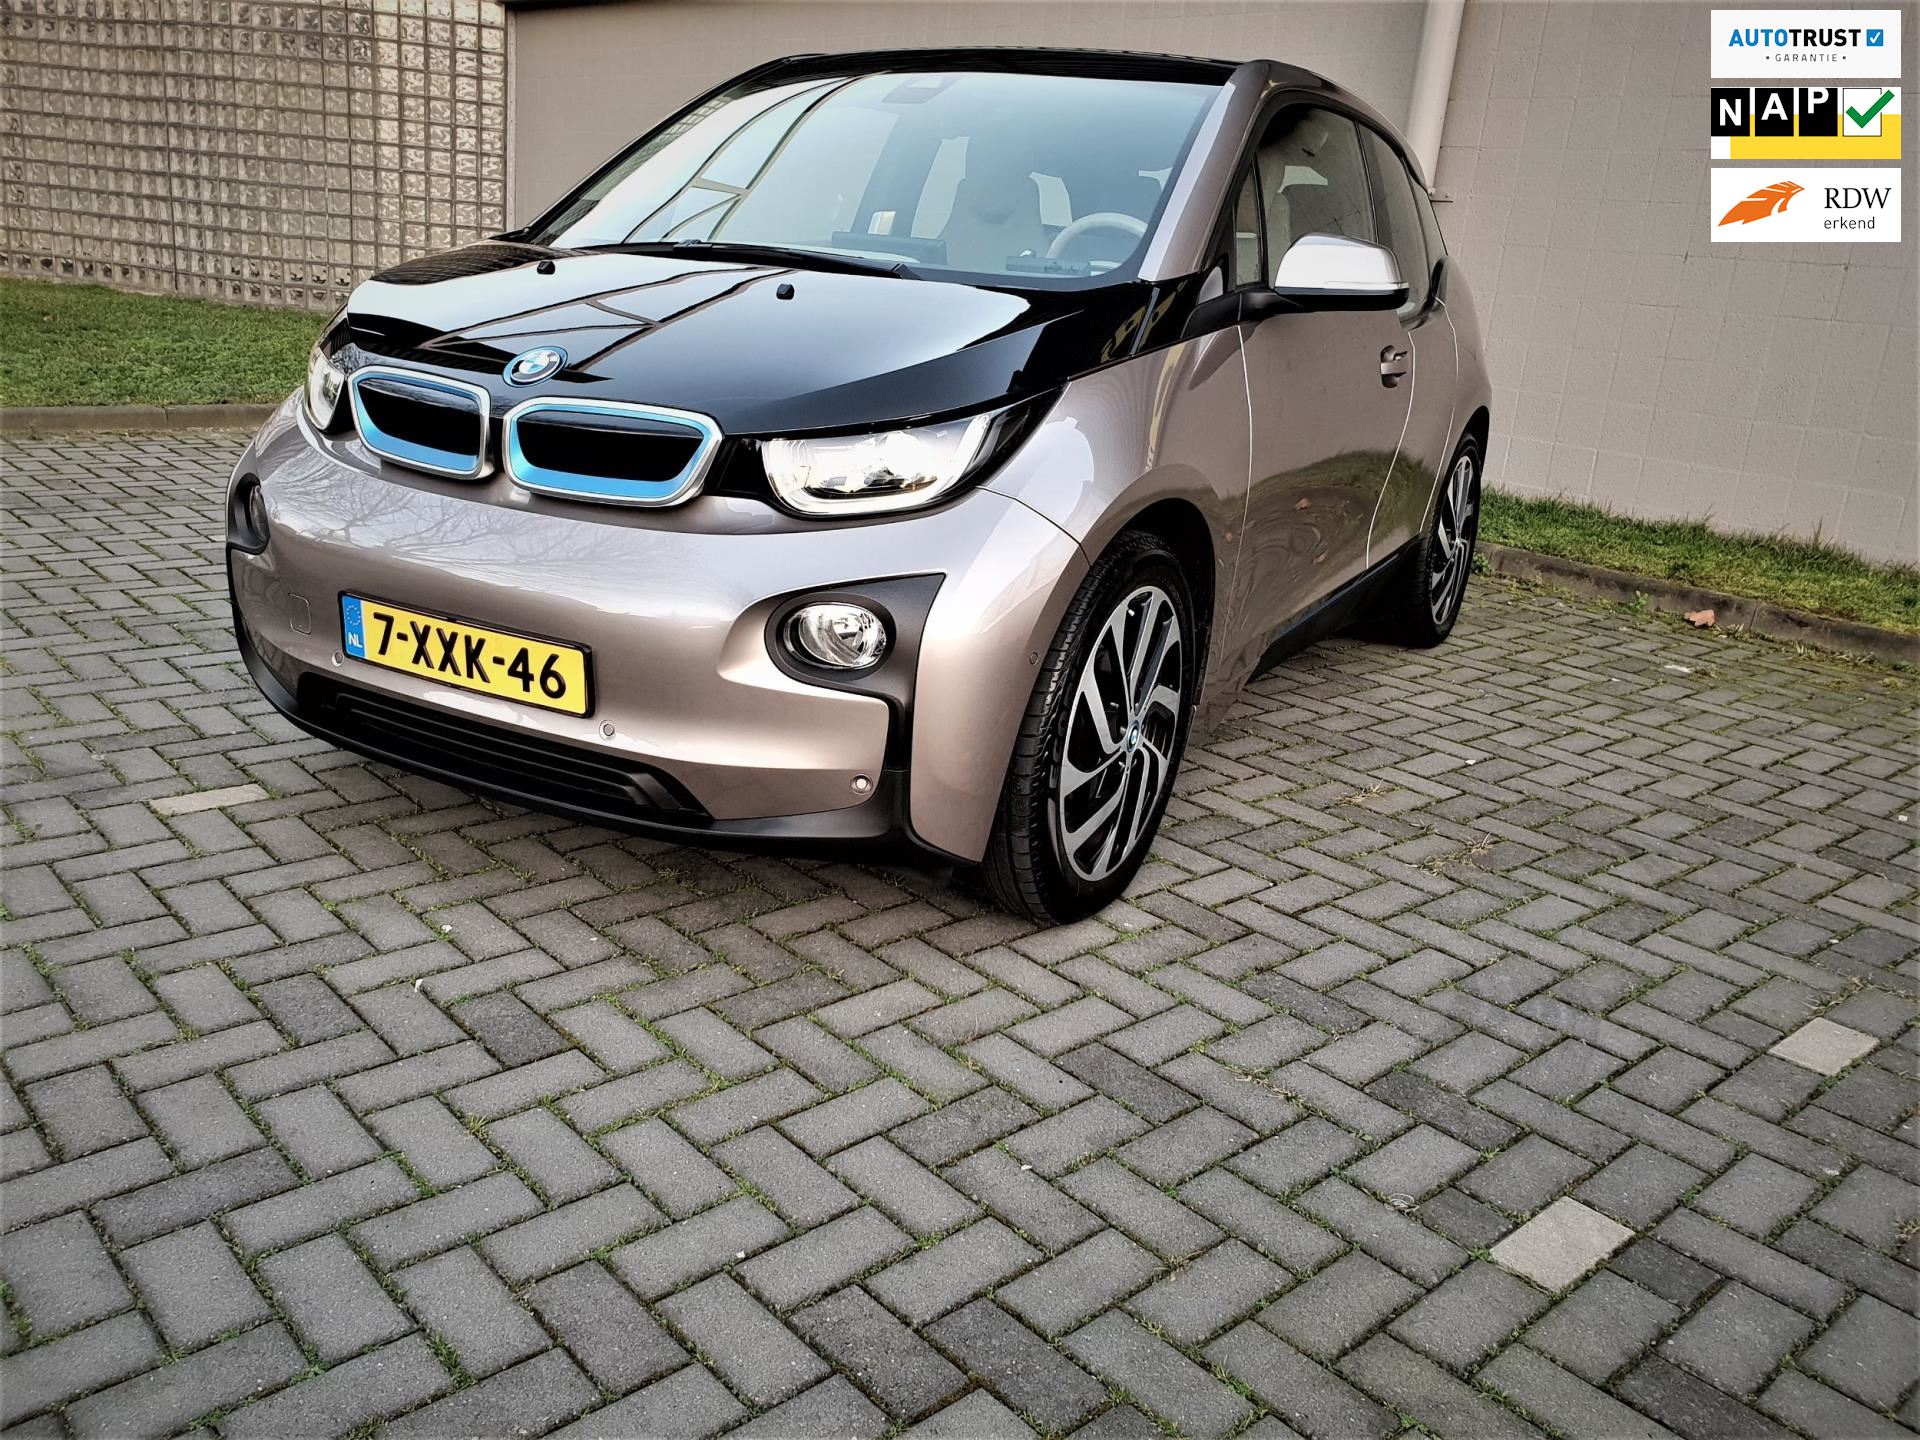 BMW I3 occasion - Auto Arends